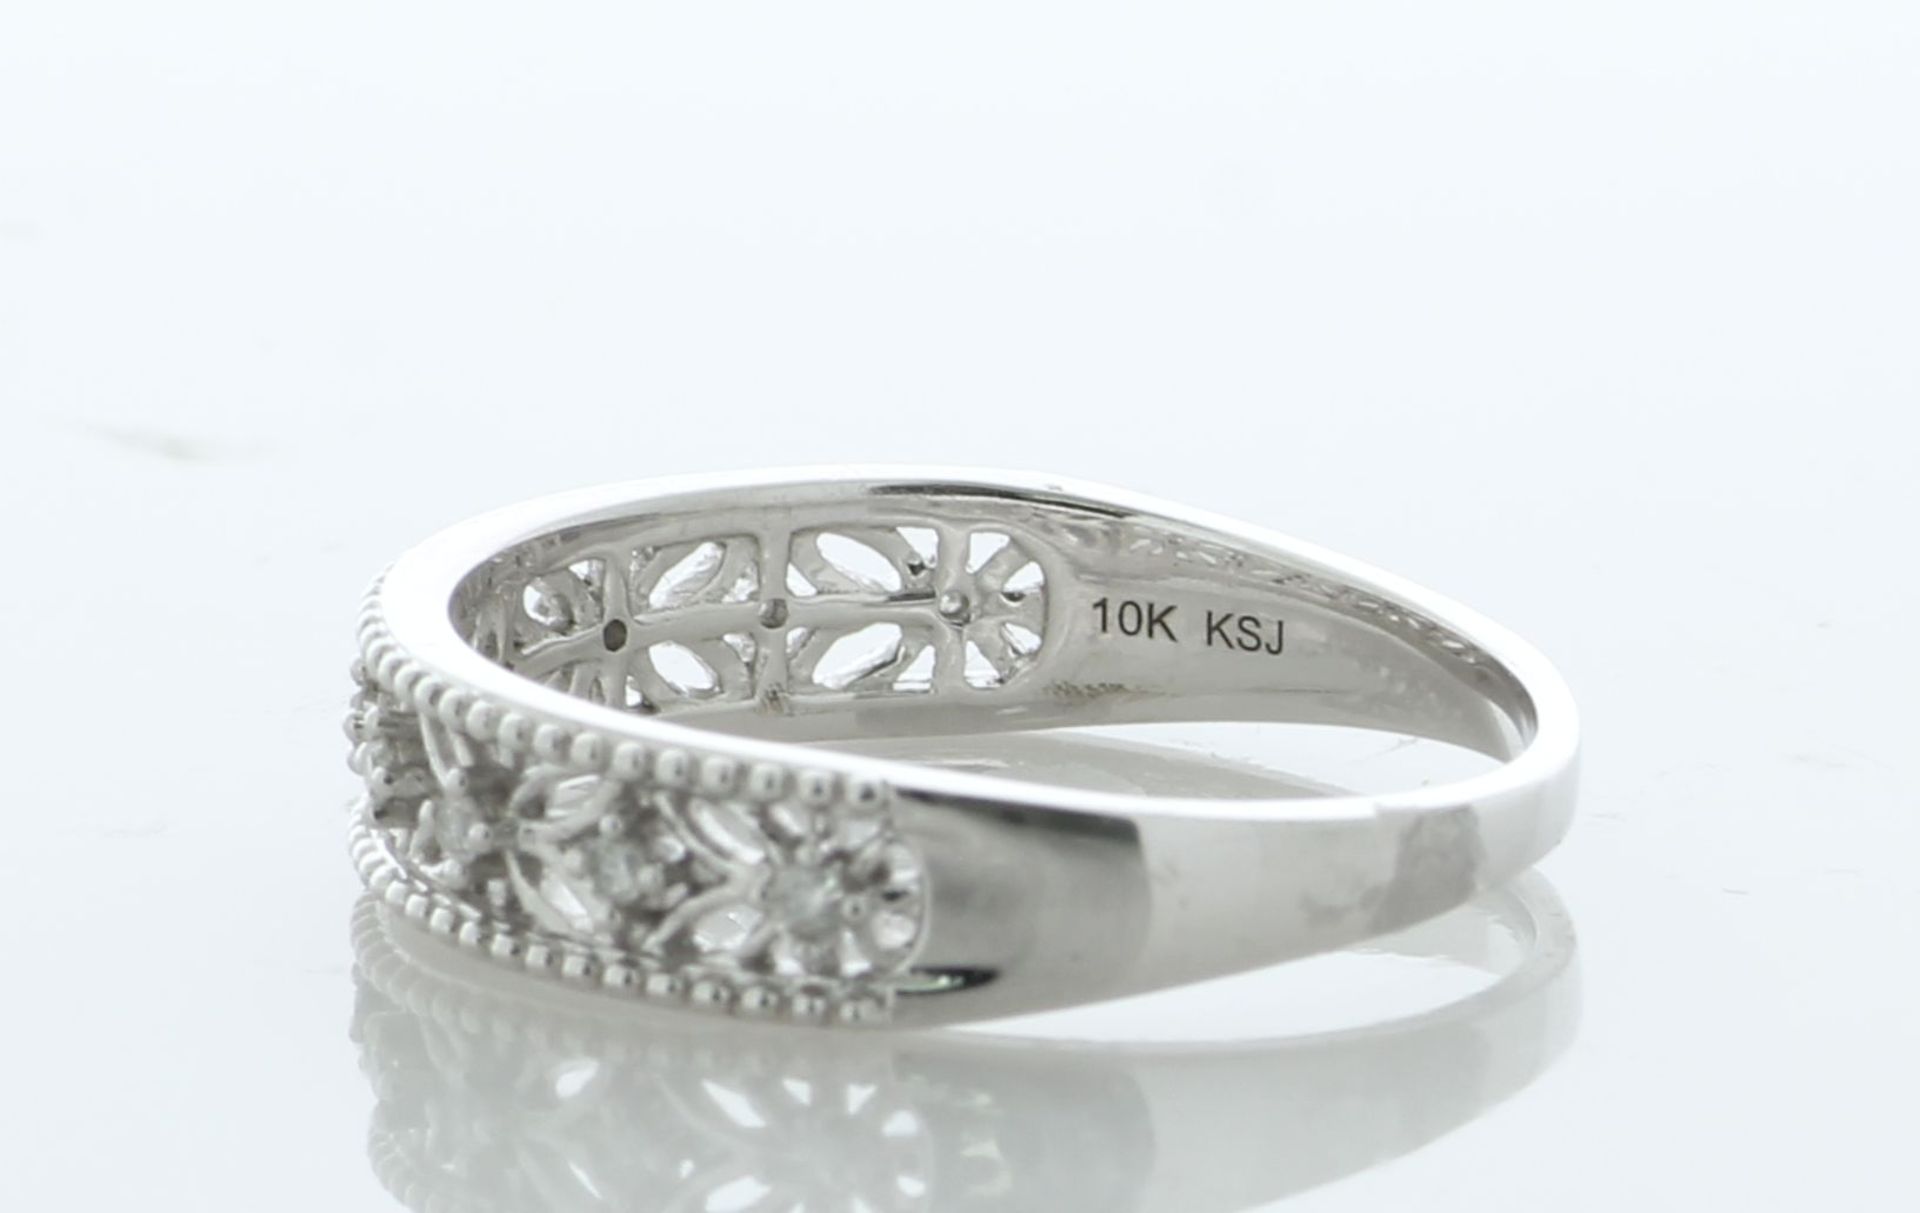 10ct White Gold Illusion Set Semi Eternity Diamond Ring 0.16 Carats - Valued By IDI £1,995.00 - This - Image 4 of 5